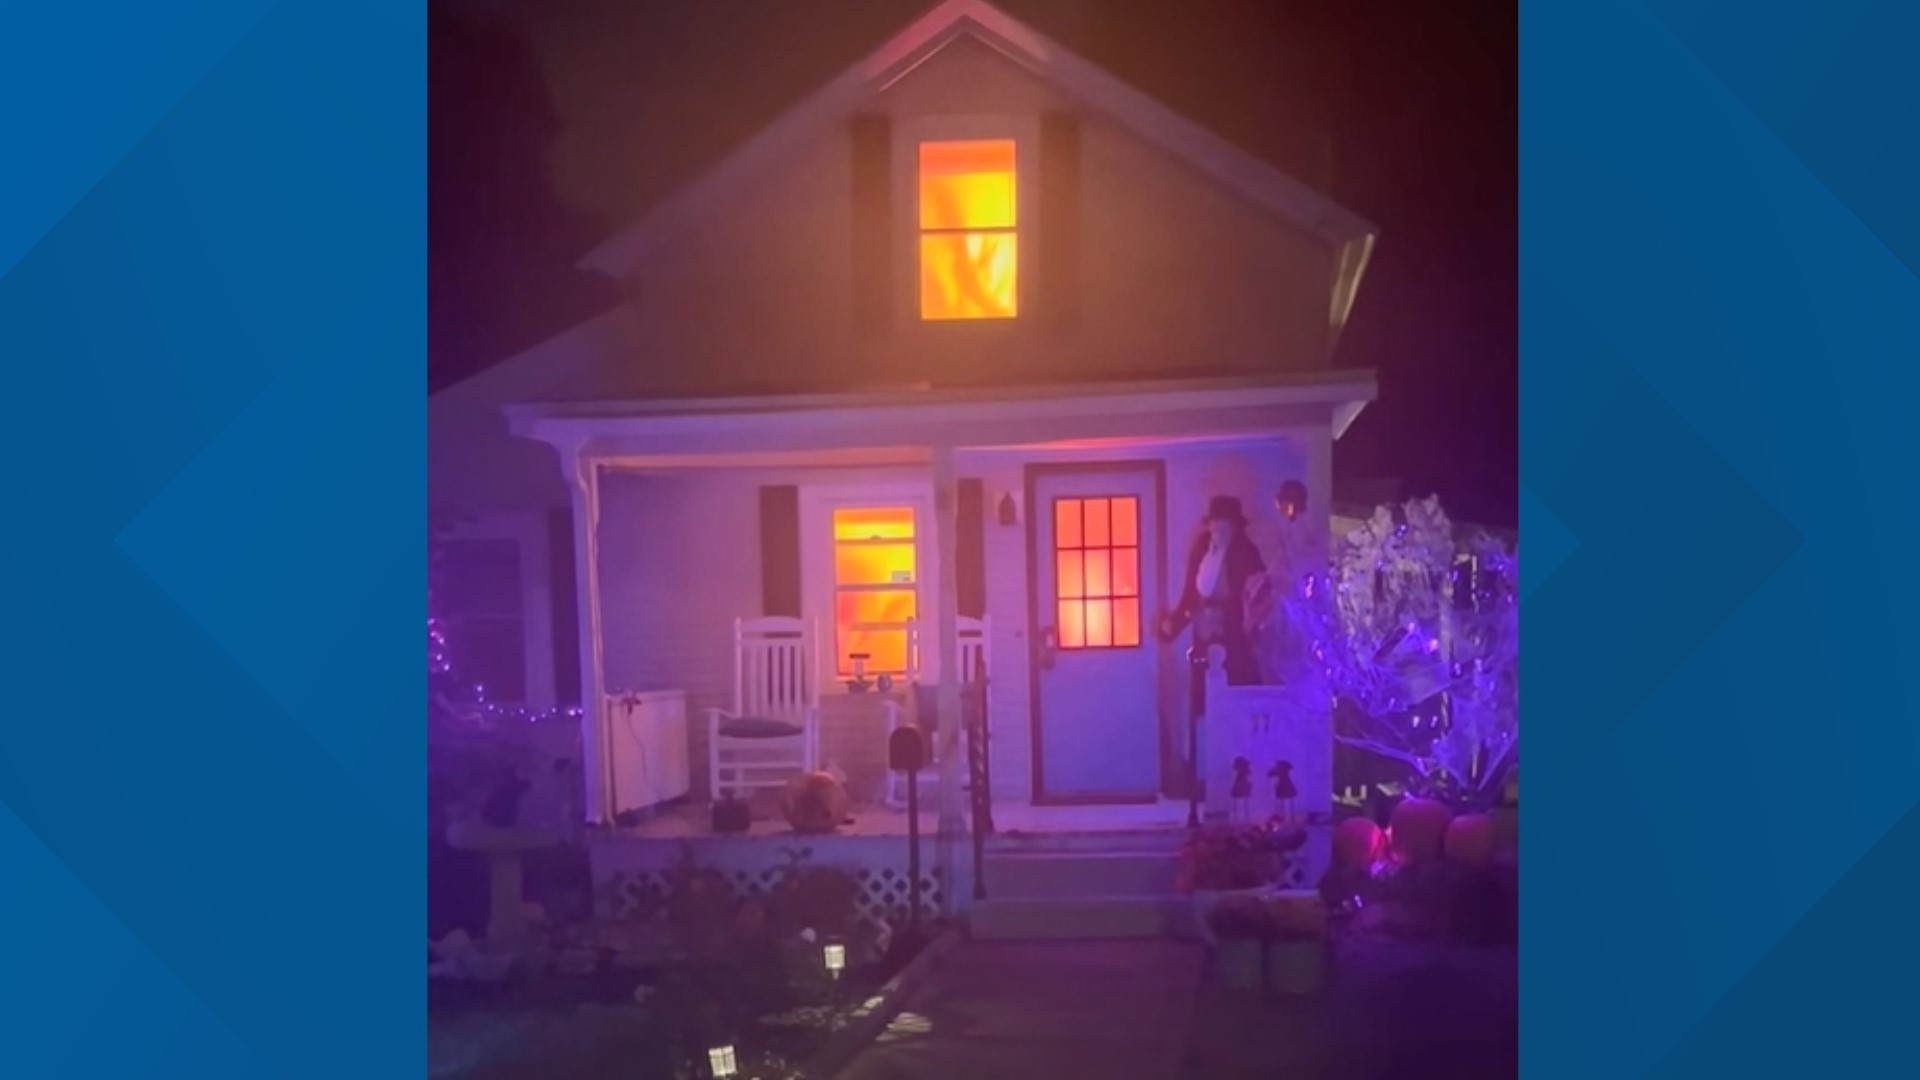 The decorations at a New York home were so realistic, someone called 911 to report a fire.